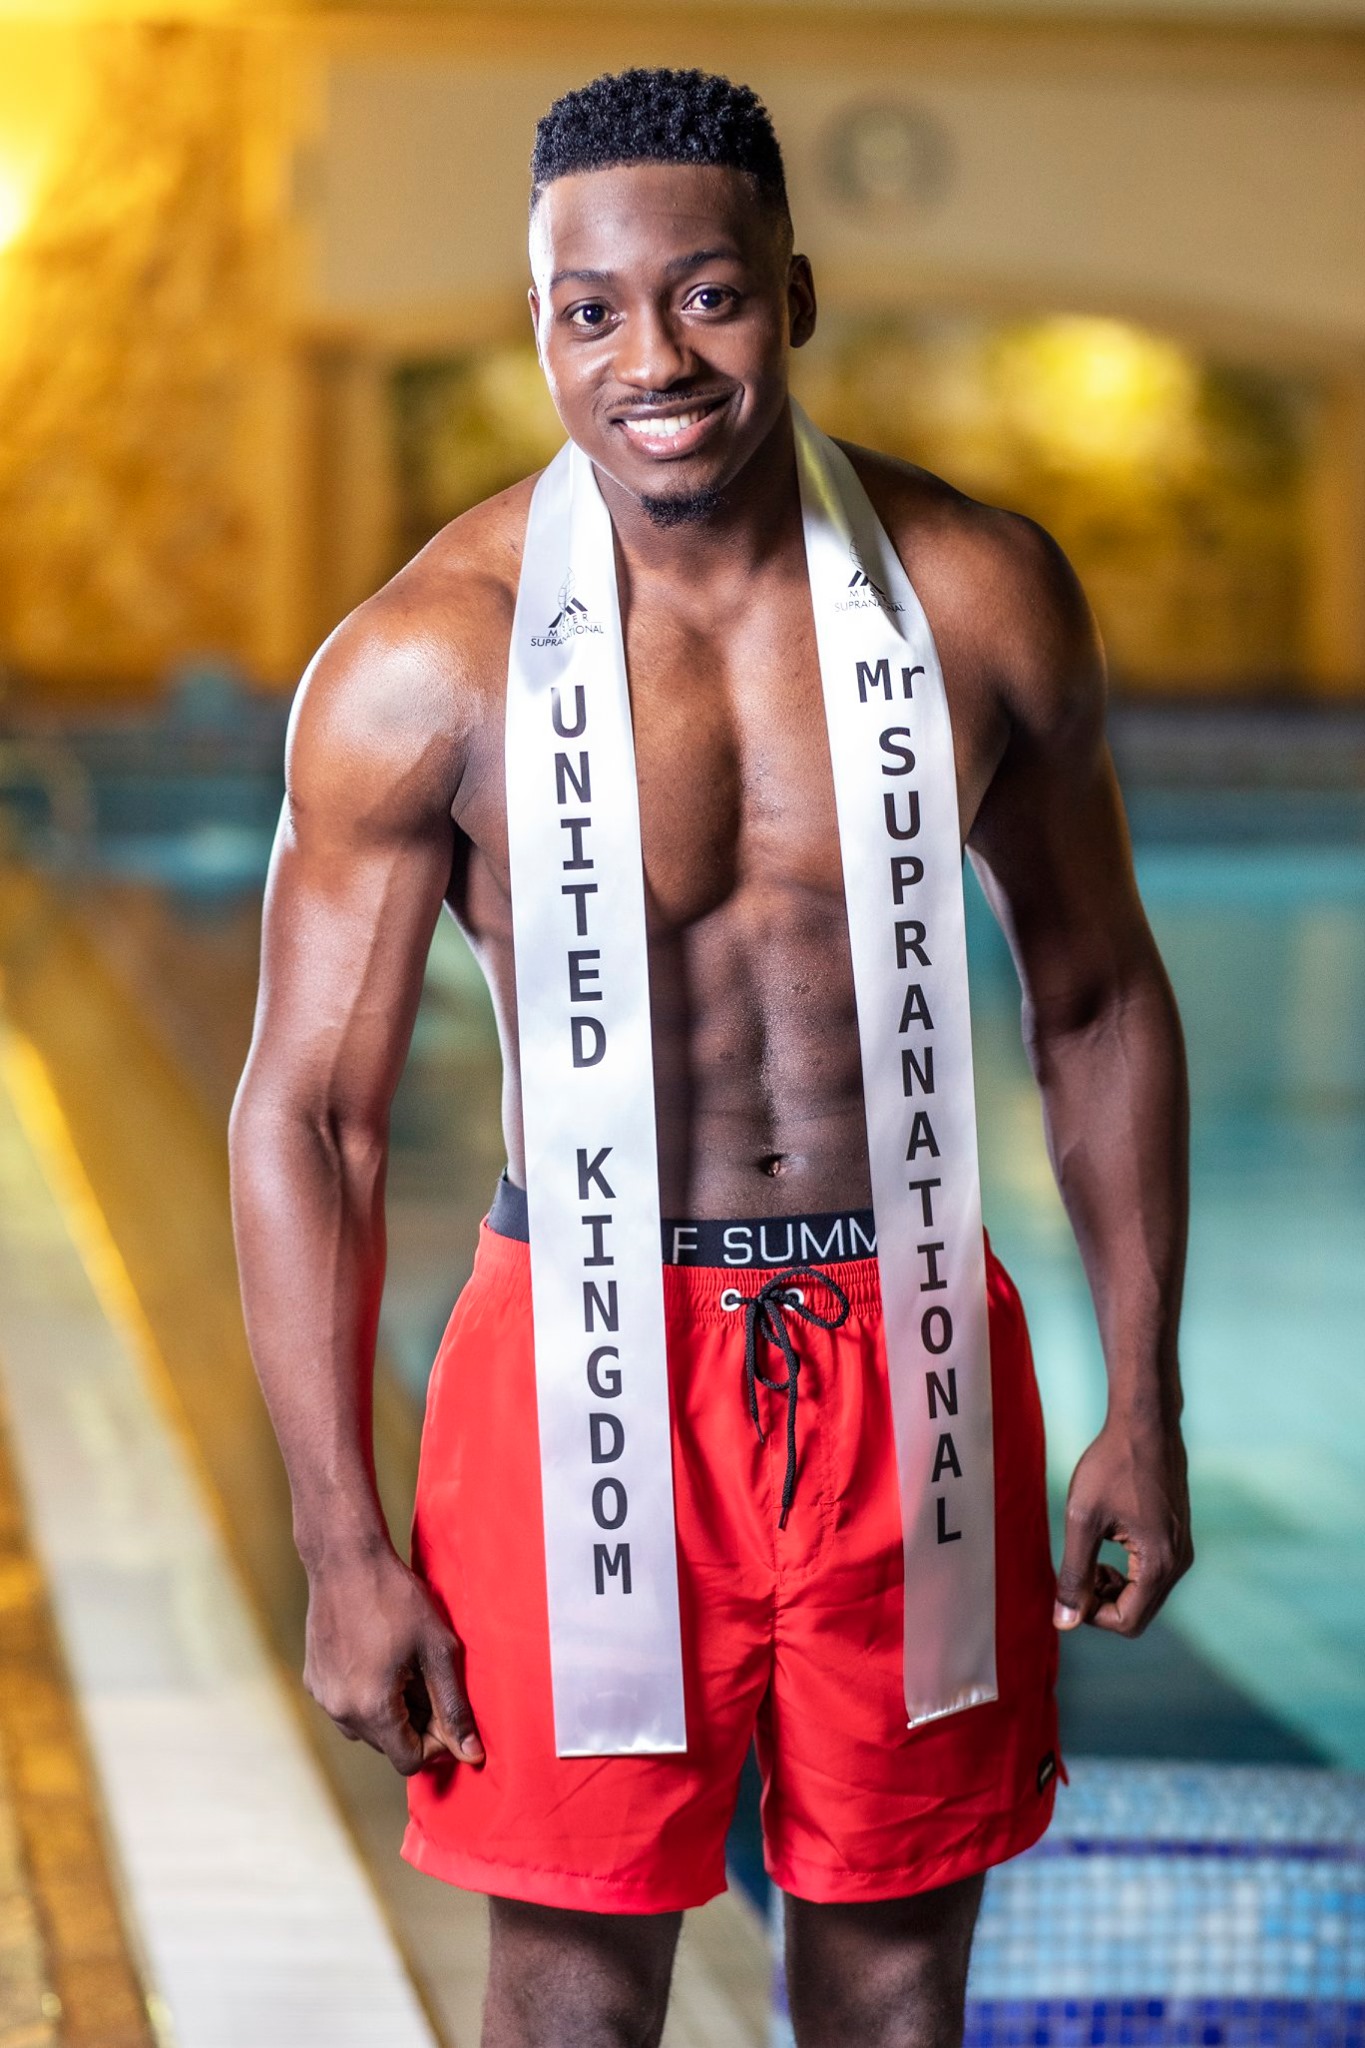 Mister Supranational 2019 Official Swimwear 00018